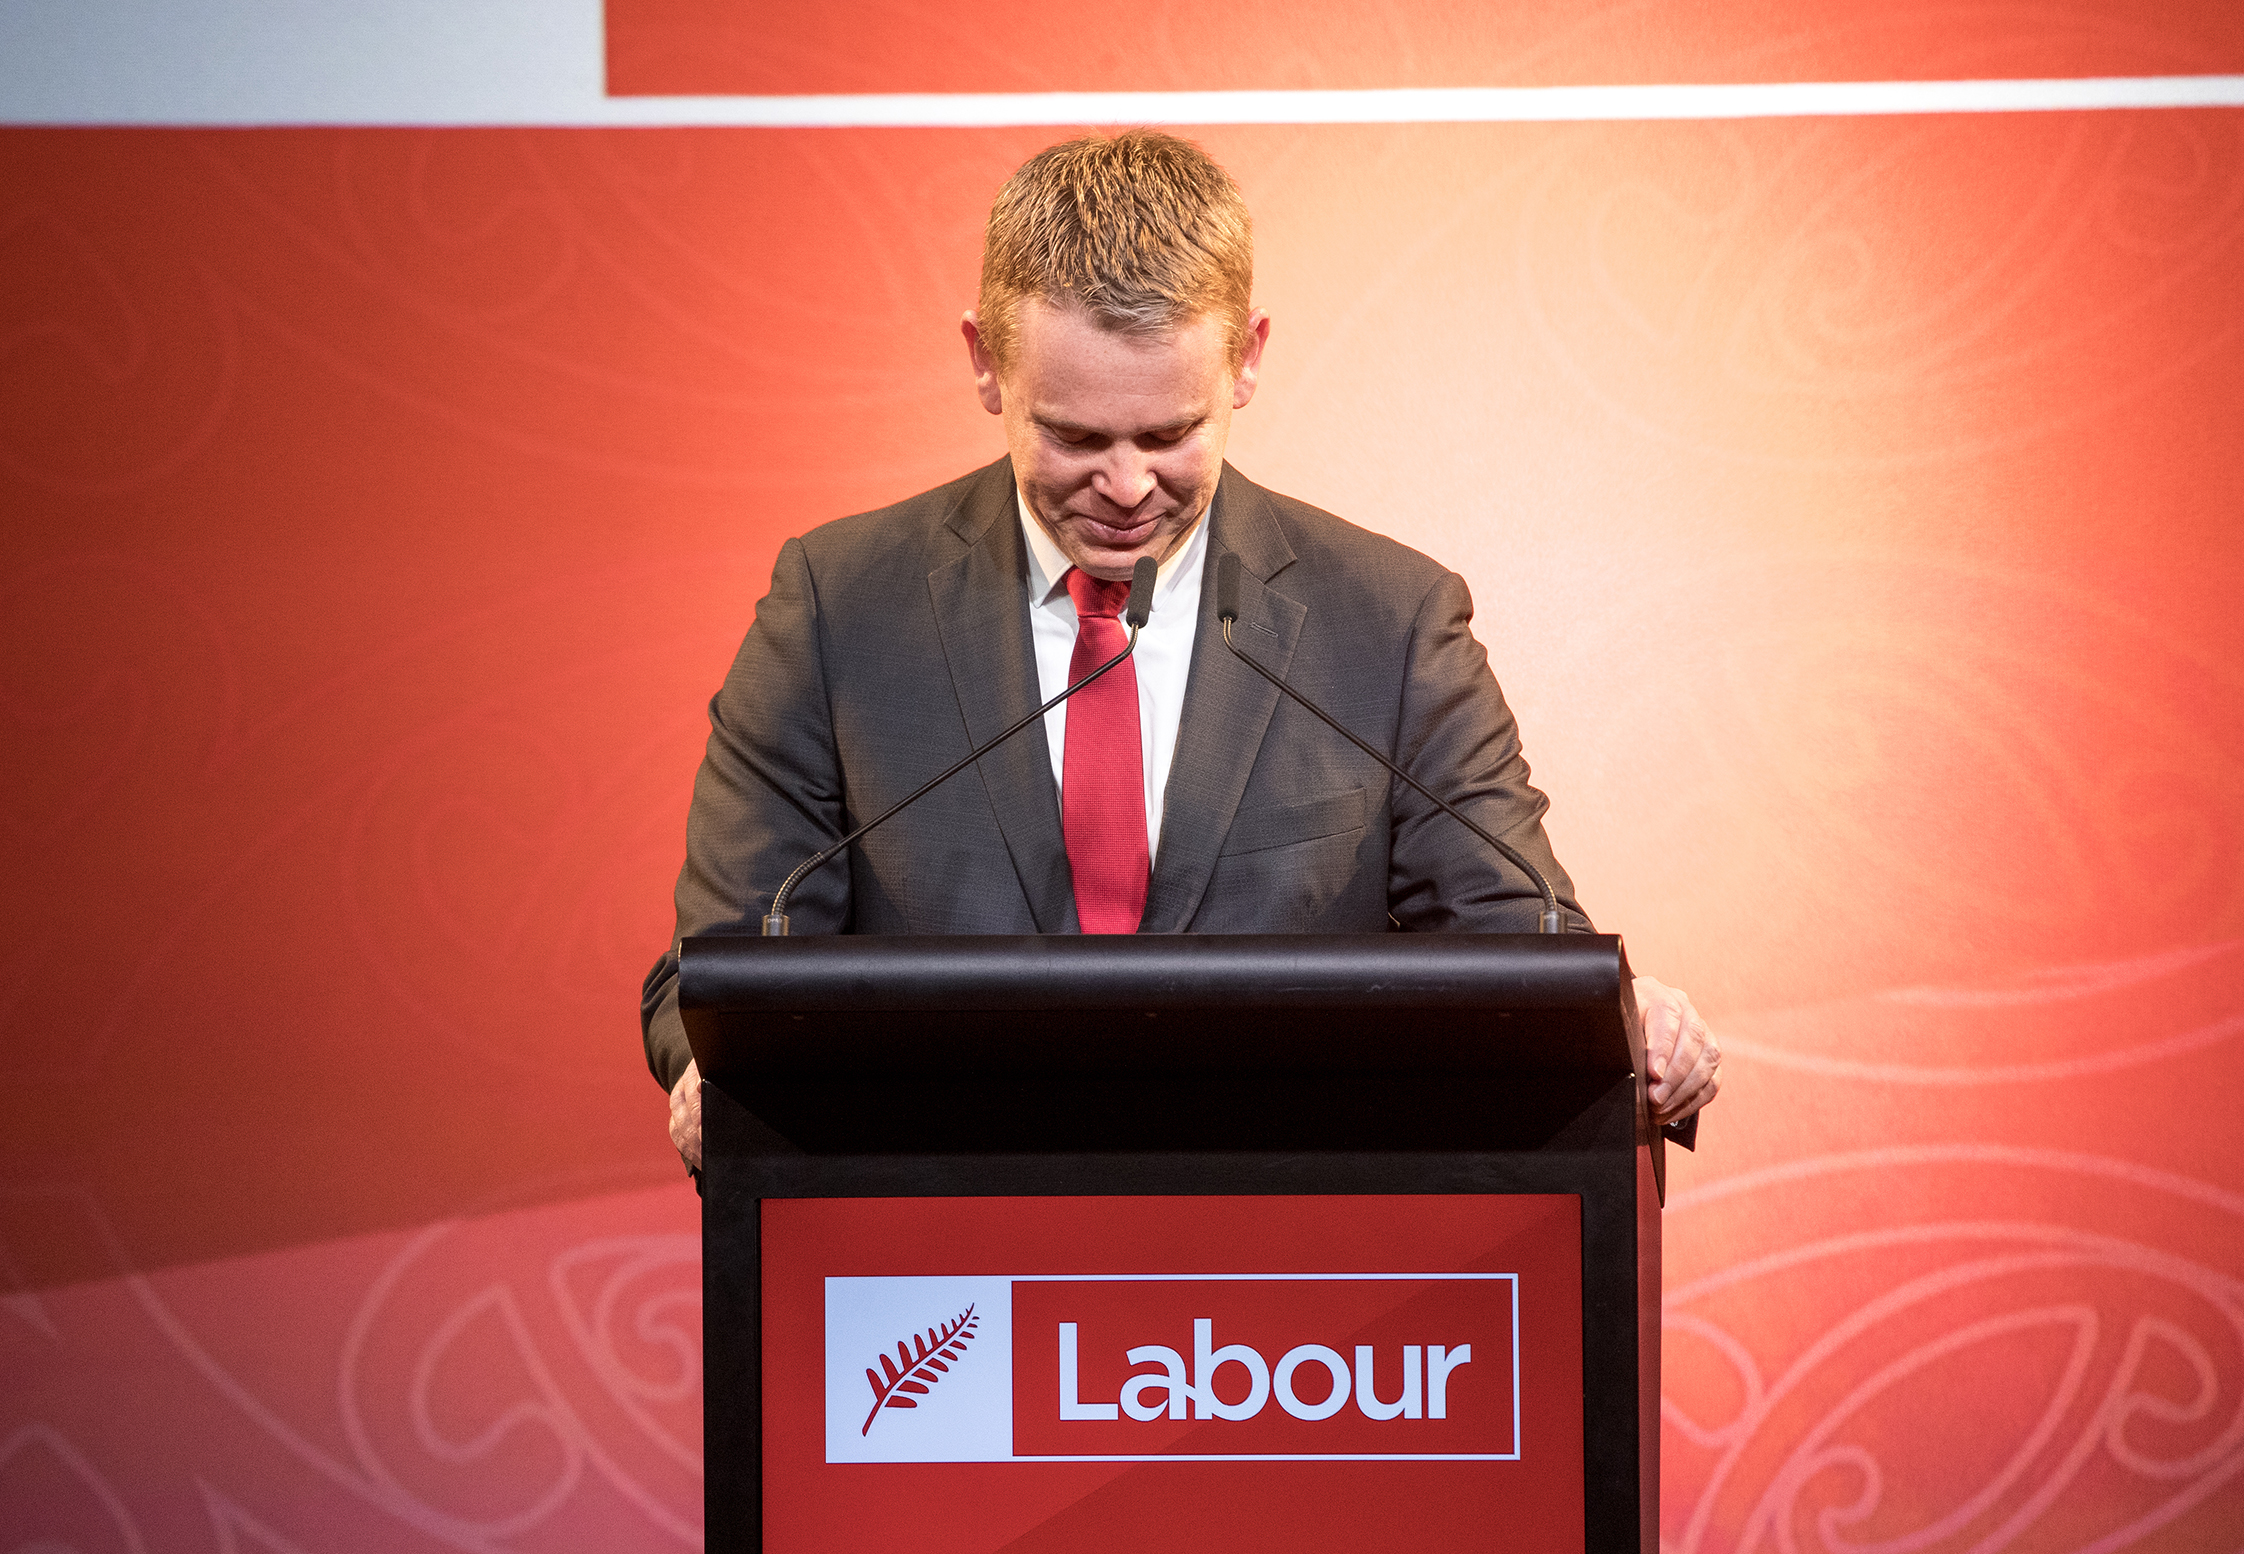 Shane Te Pou: Labour in danger of leadership void after election